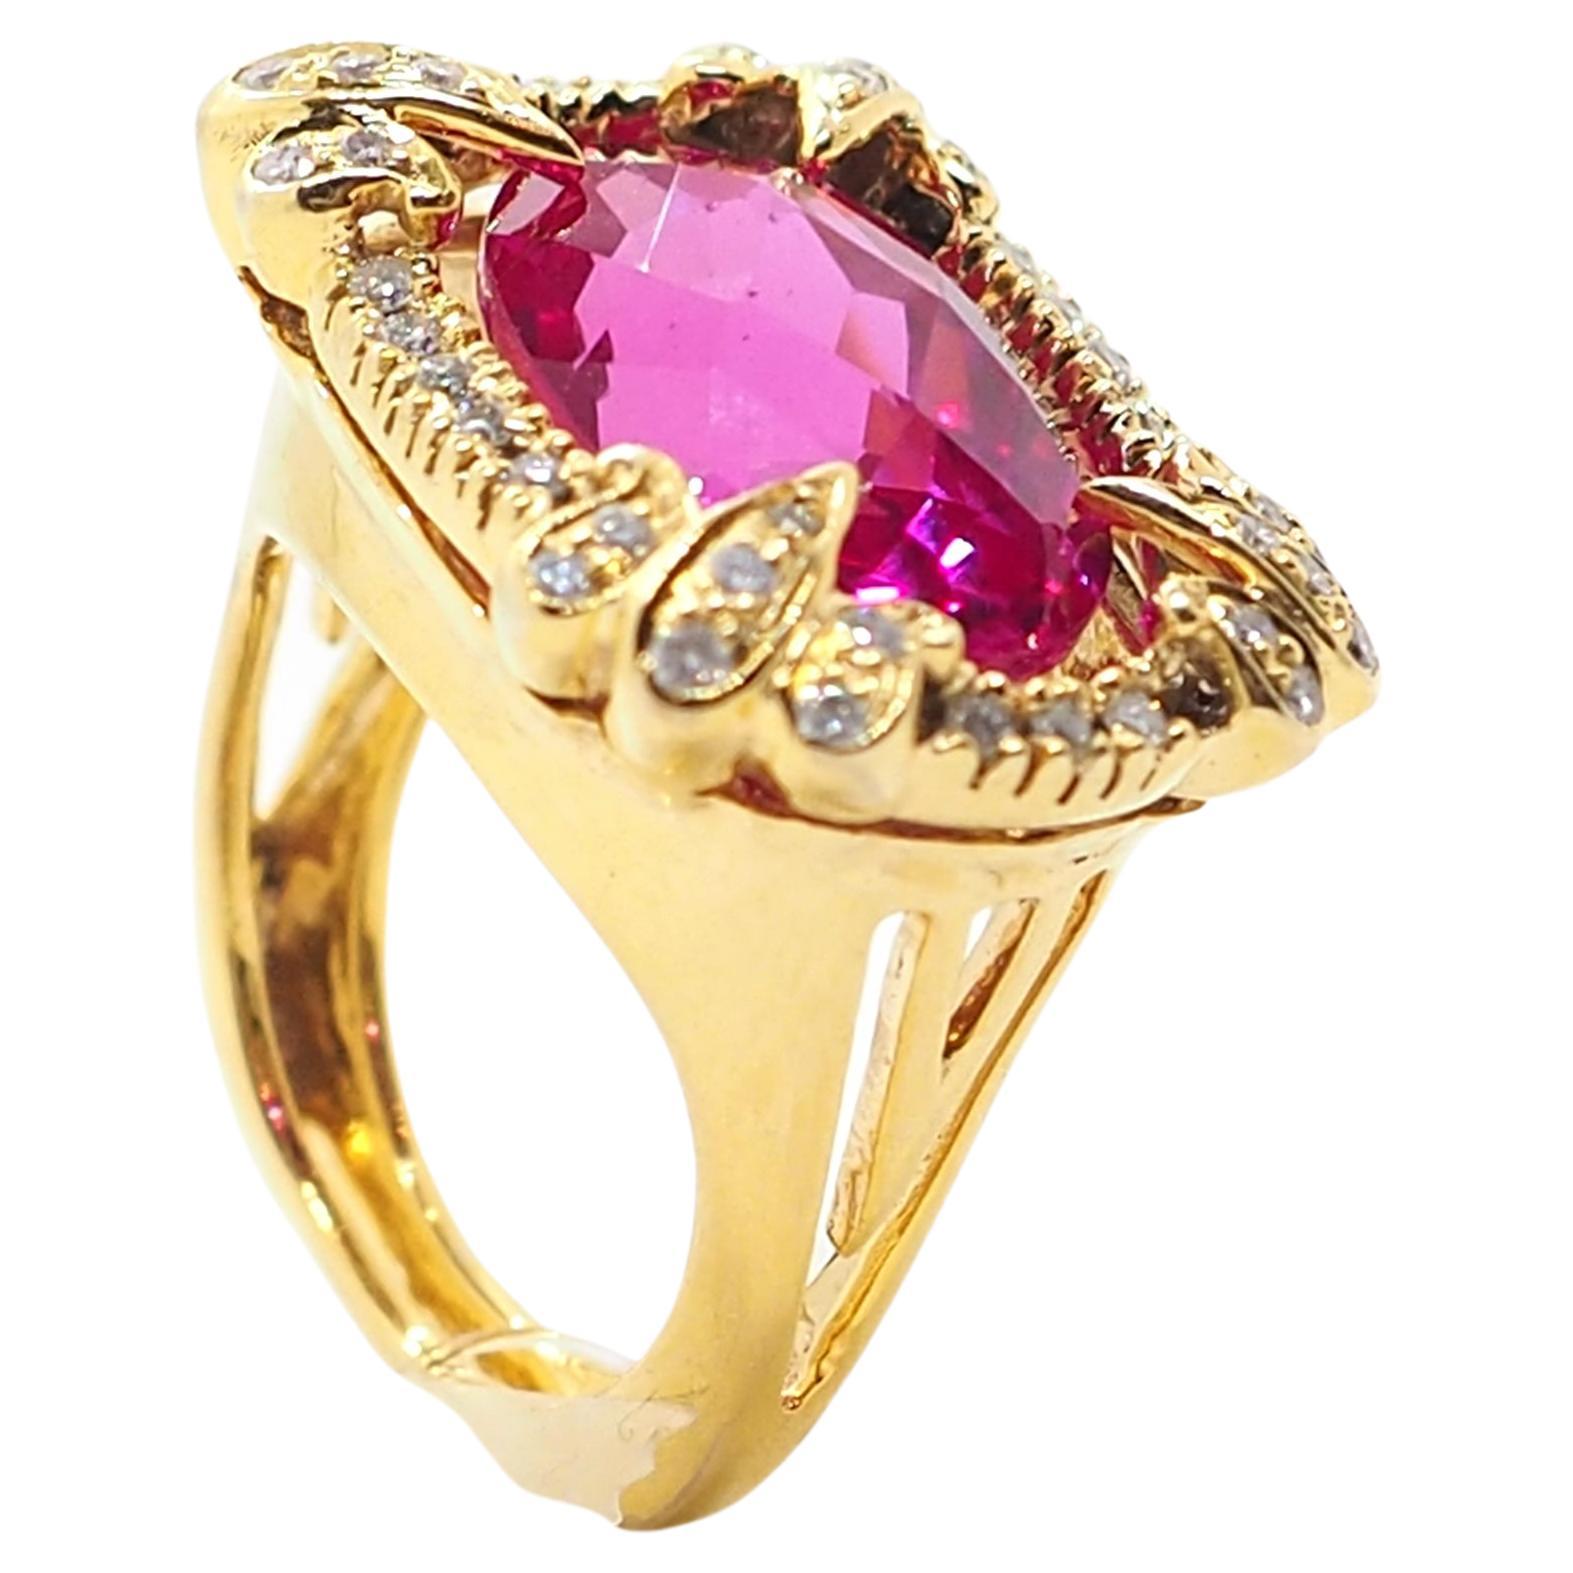 Statement beautiful ring crafted in a 18k yellow gold and decorated with an oval shape synthetic ruby 12*15 mm and 44 diamonds of 1,2 carats. 

Eu size: 55 
Weight: 17g

All our pieces have been carefully chosen, restored and prepared for our